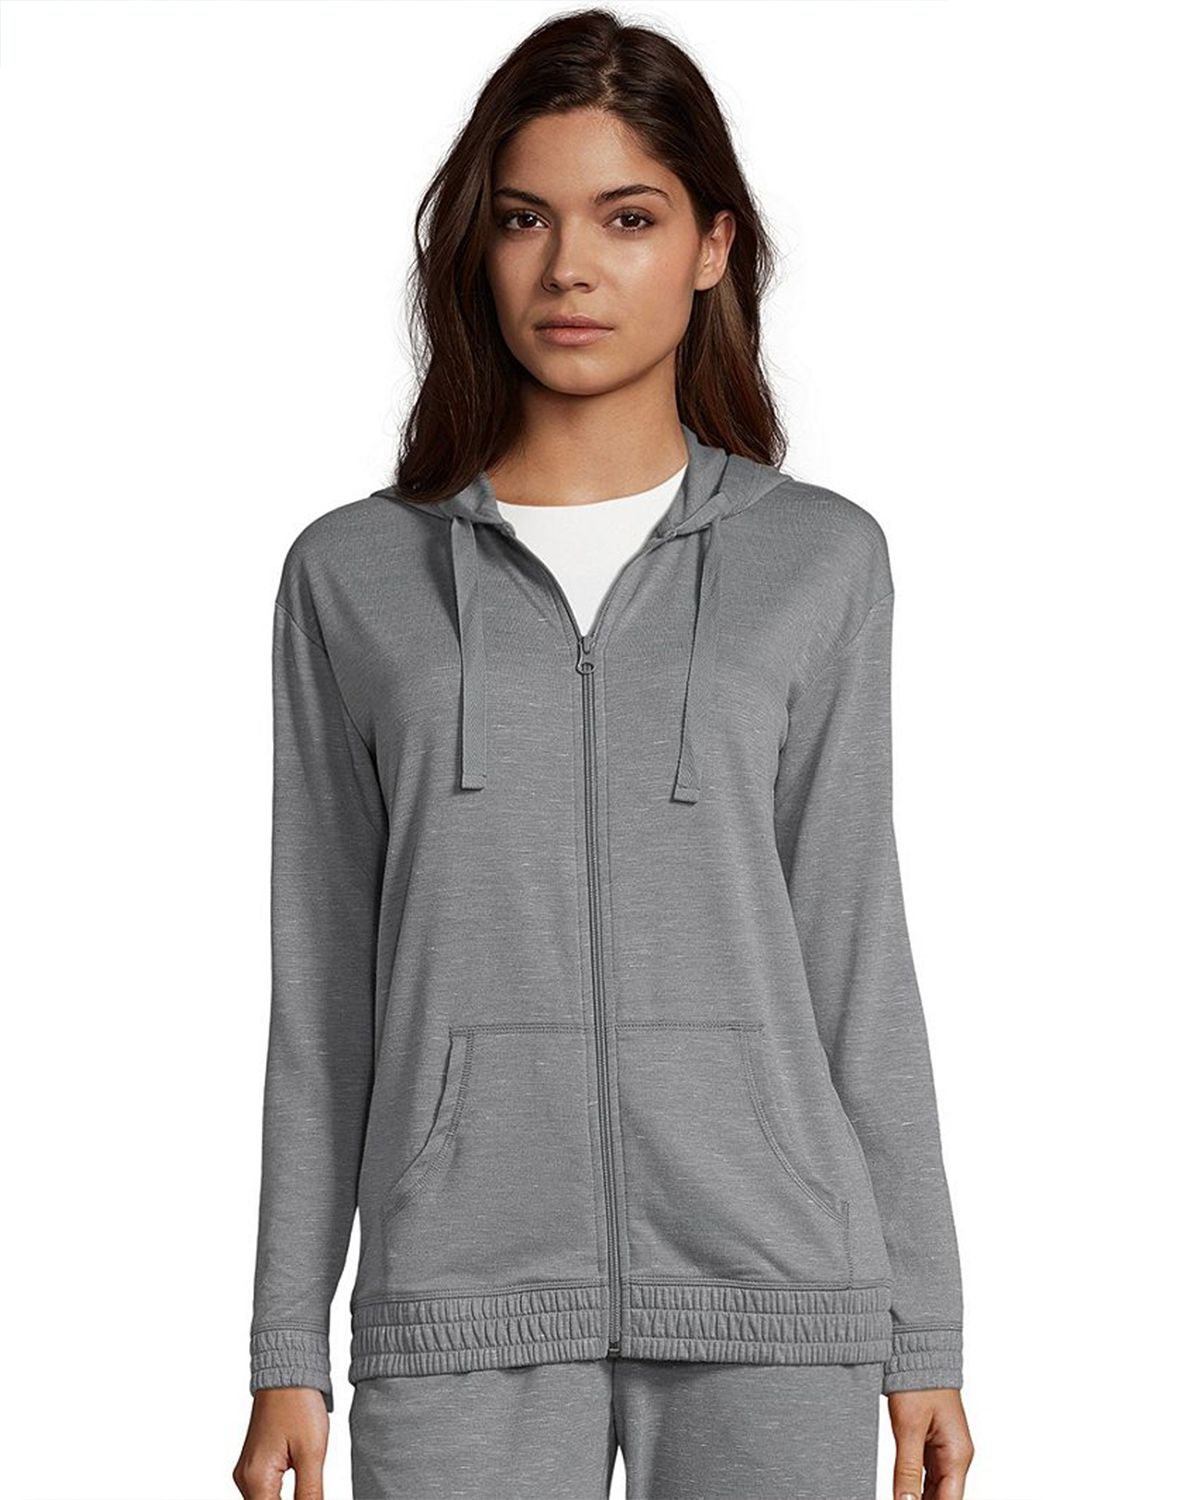 Hanes O4A06 Women's French Terry Full Zip Hoodie